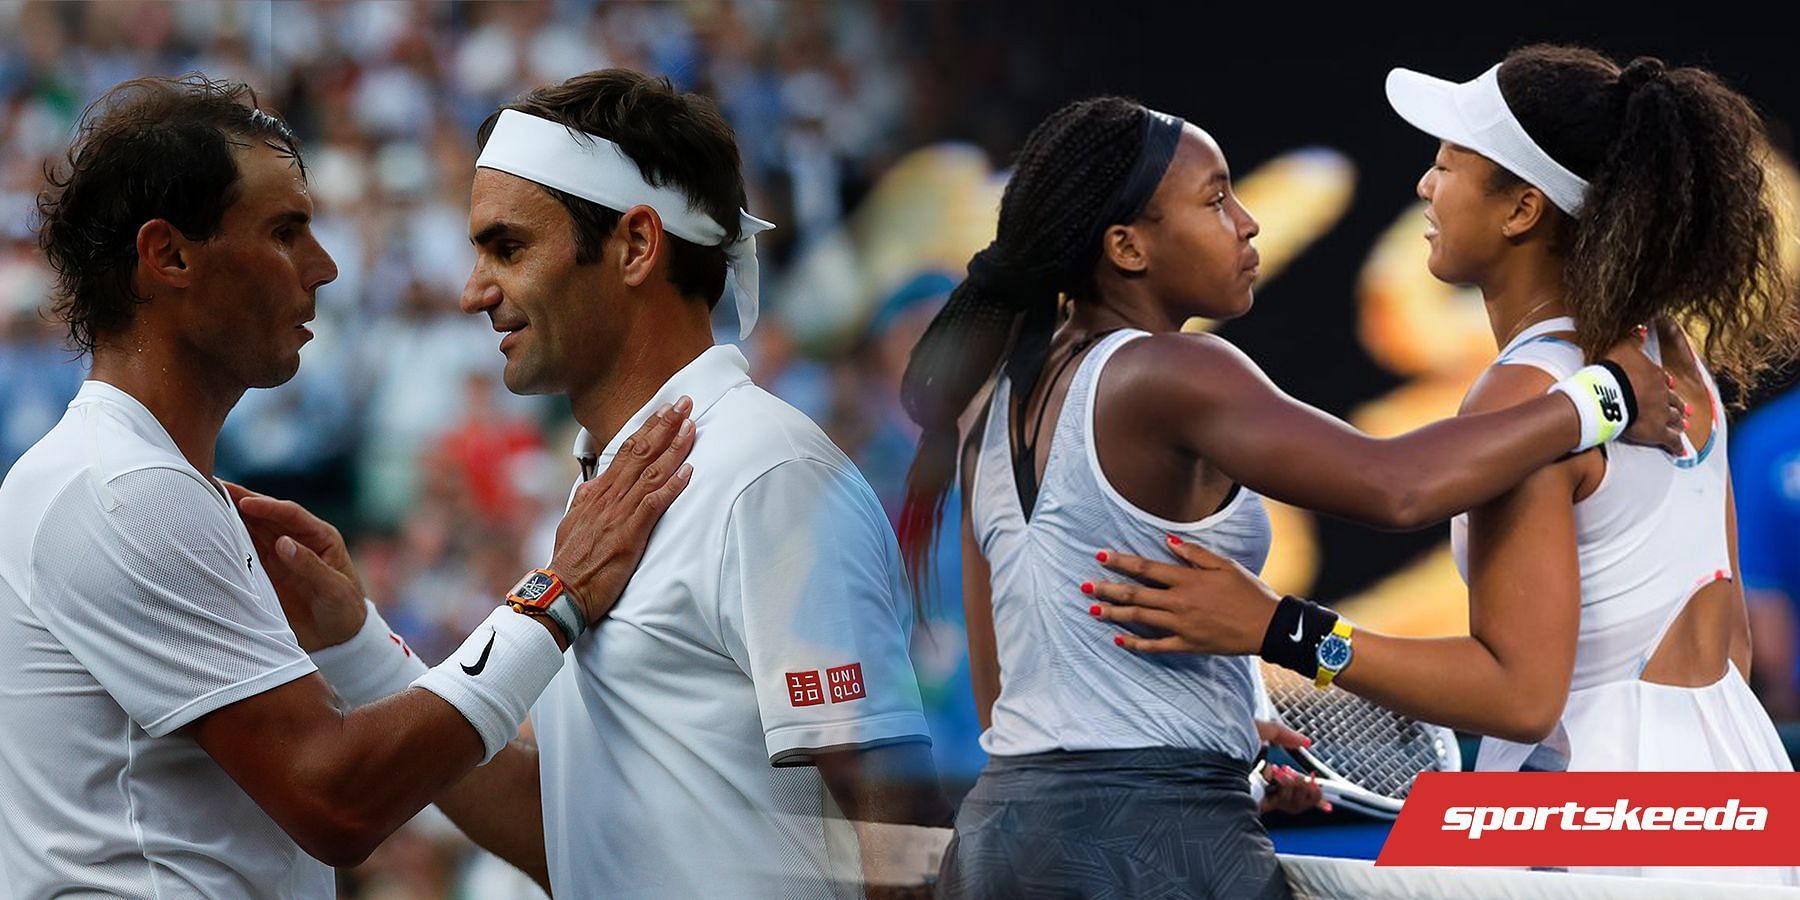 Coco Gauff compares her matchup with Naomi Osaka (right photo) to that of Rafael Nadal and Roger Federer&#039;s rivalry and friendship (left photo).